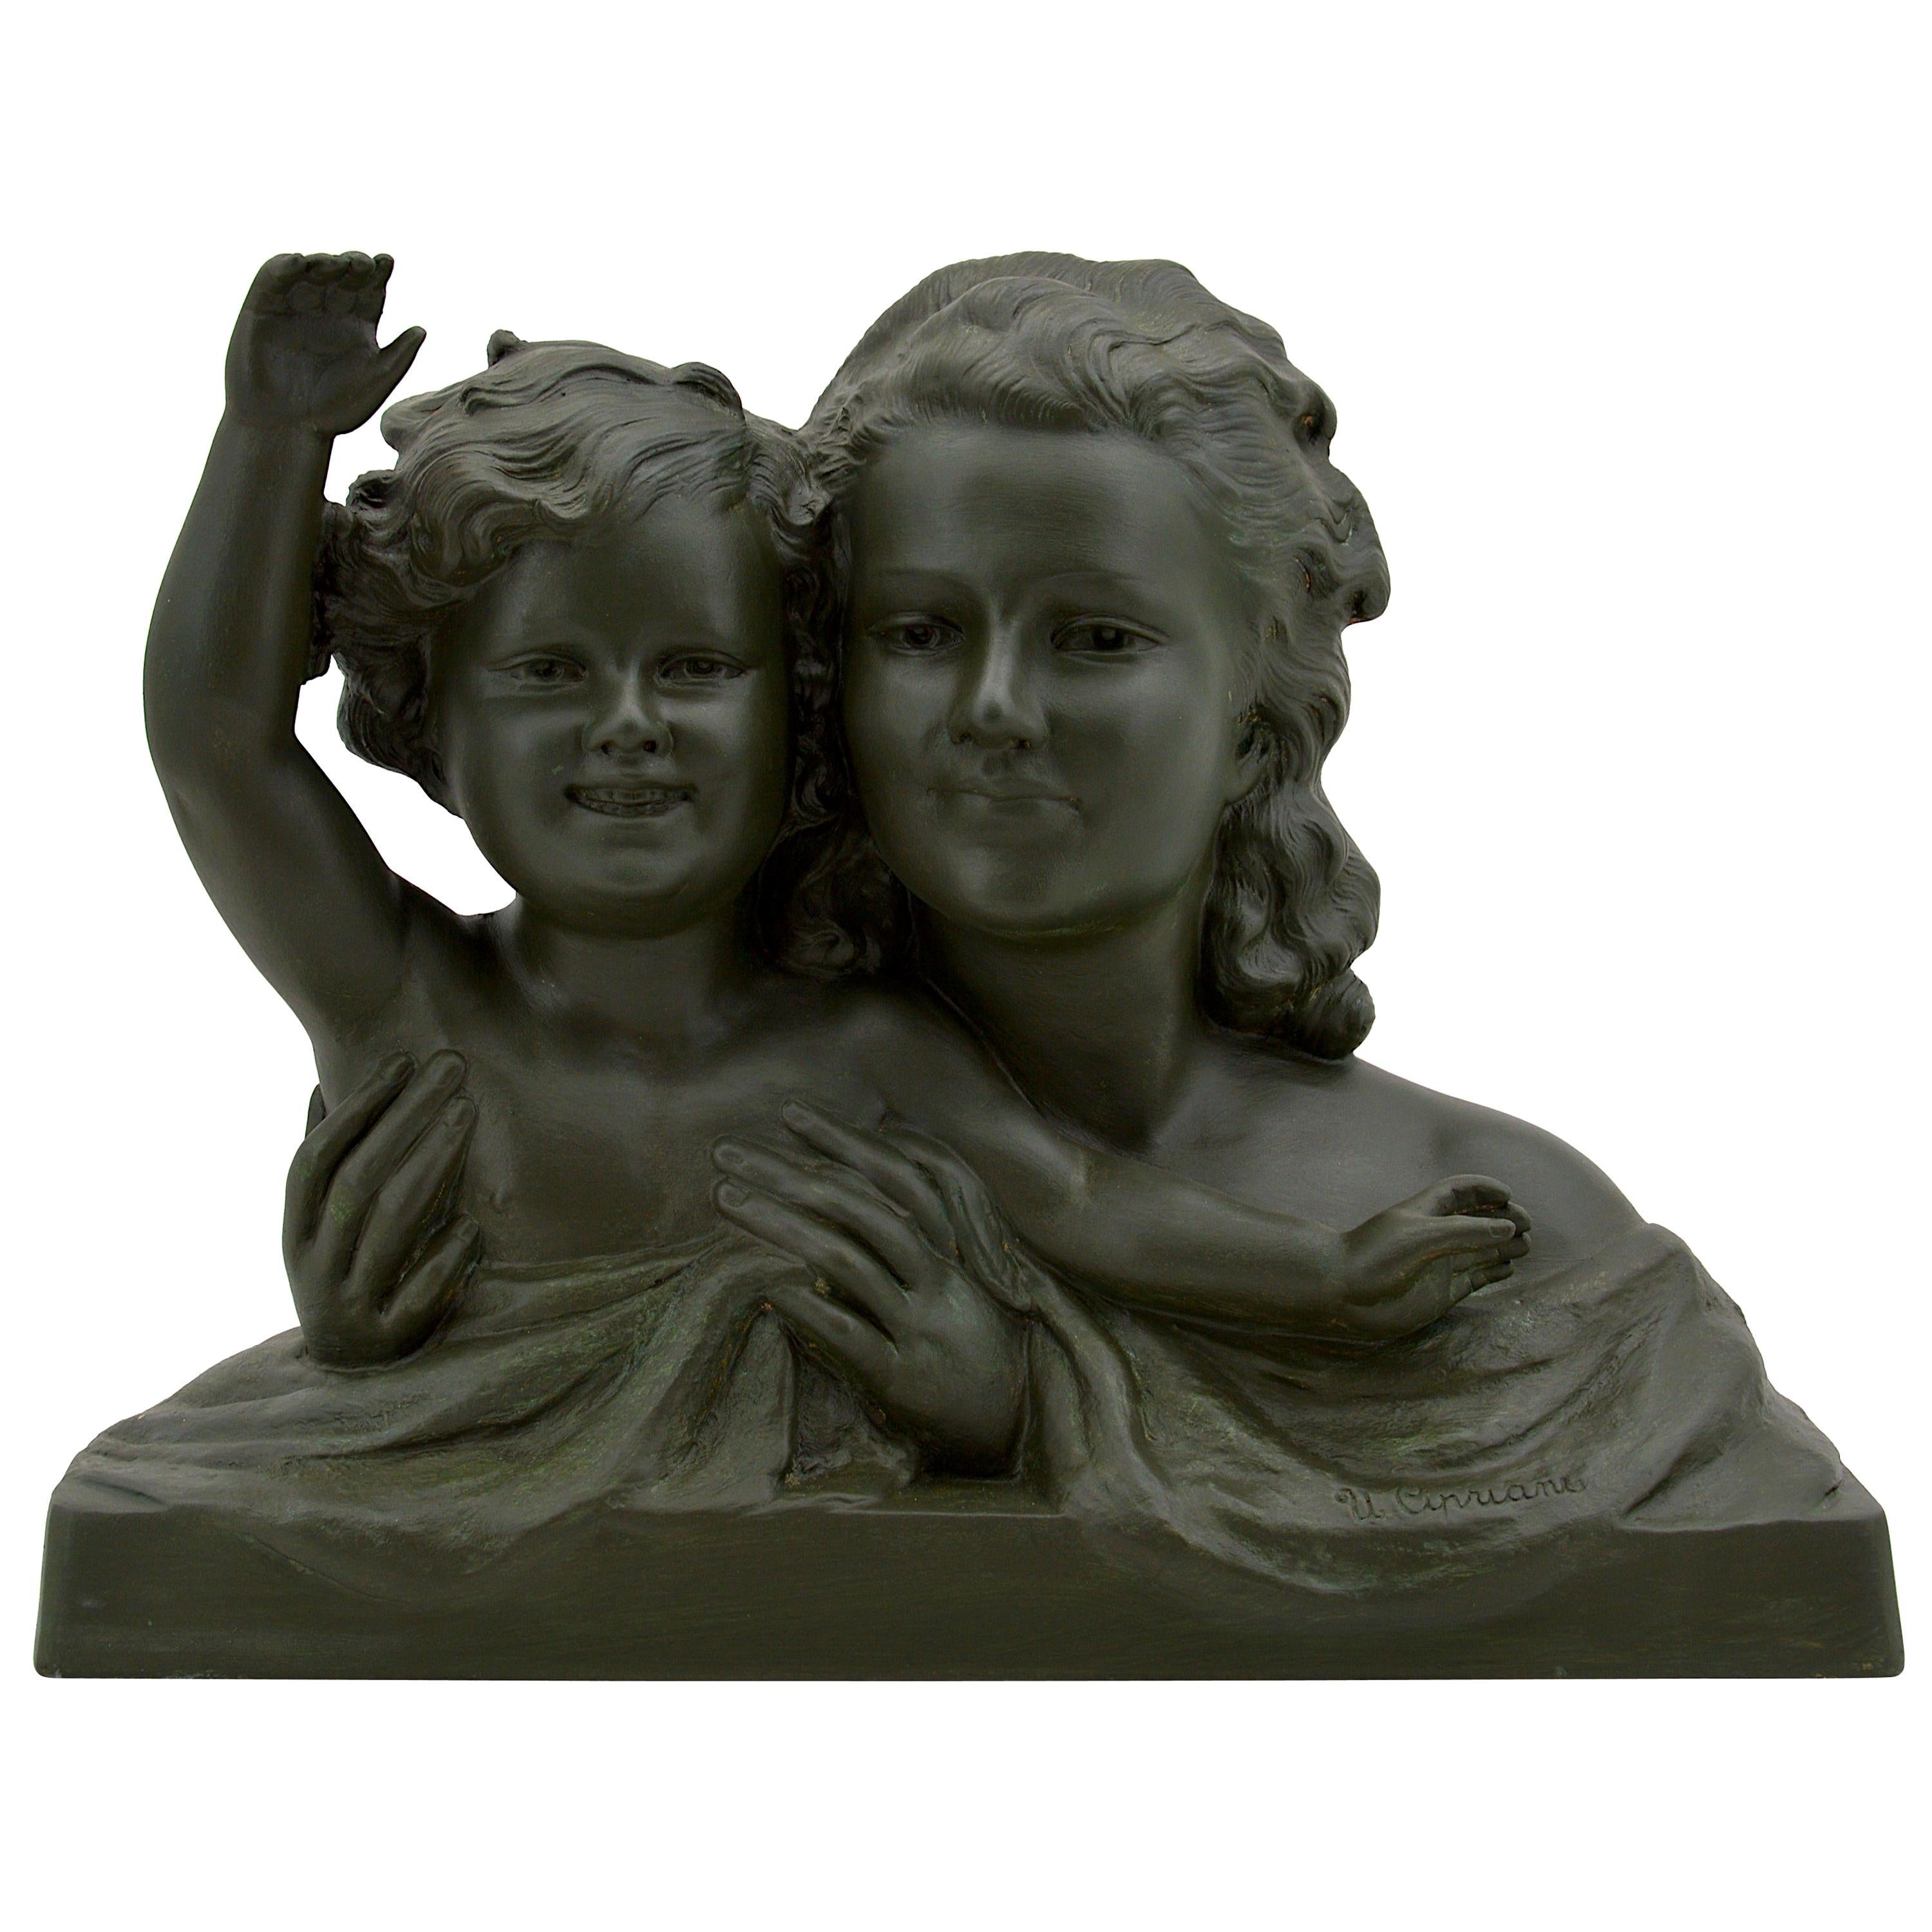 Ugo Cipriani French Large Art Deco Terracotta Mother and Child Sculpture, 1930s